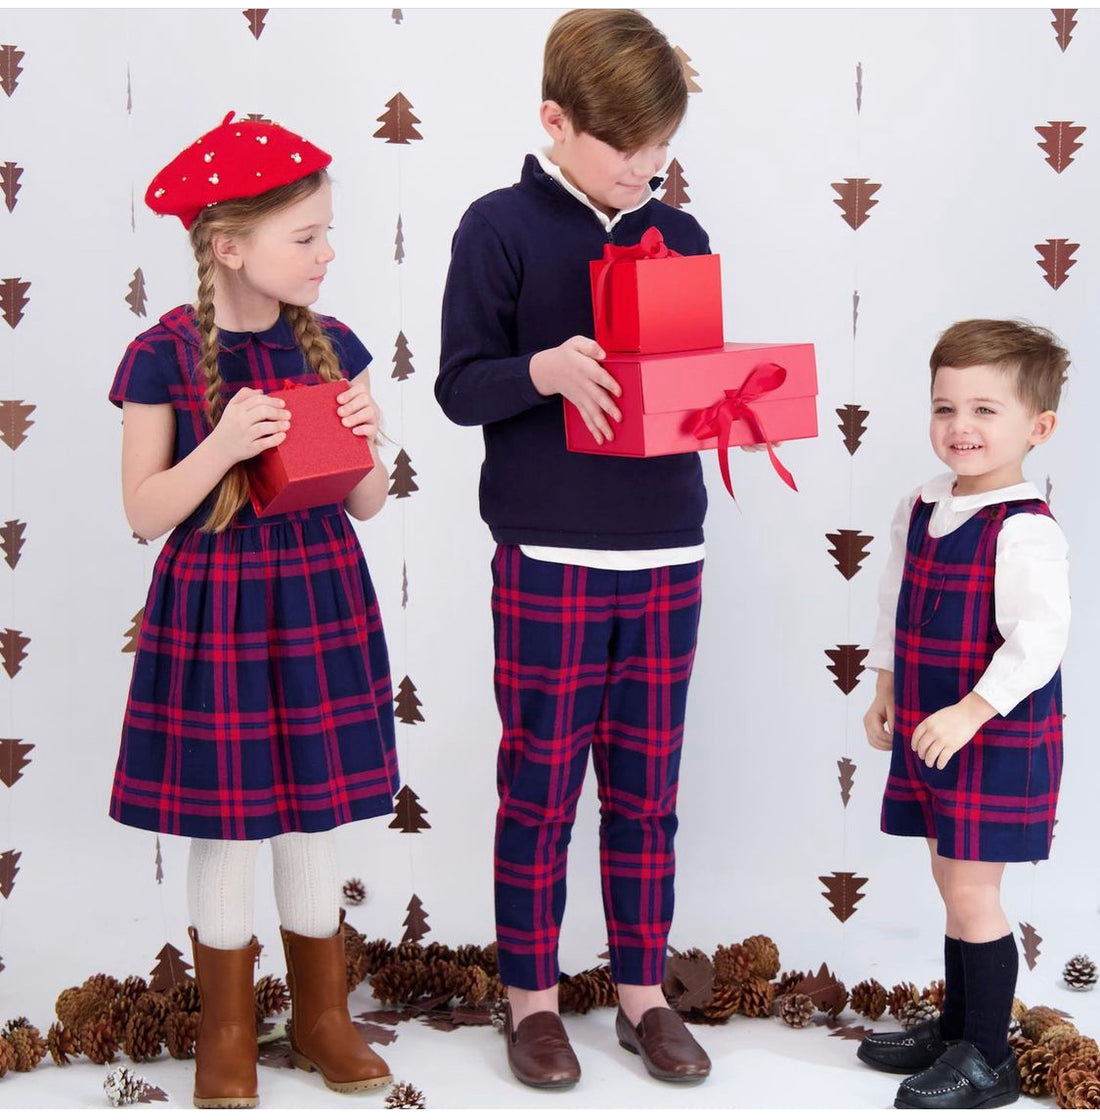 The History of Plaid: Everyone's Favorite at Christmas